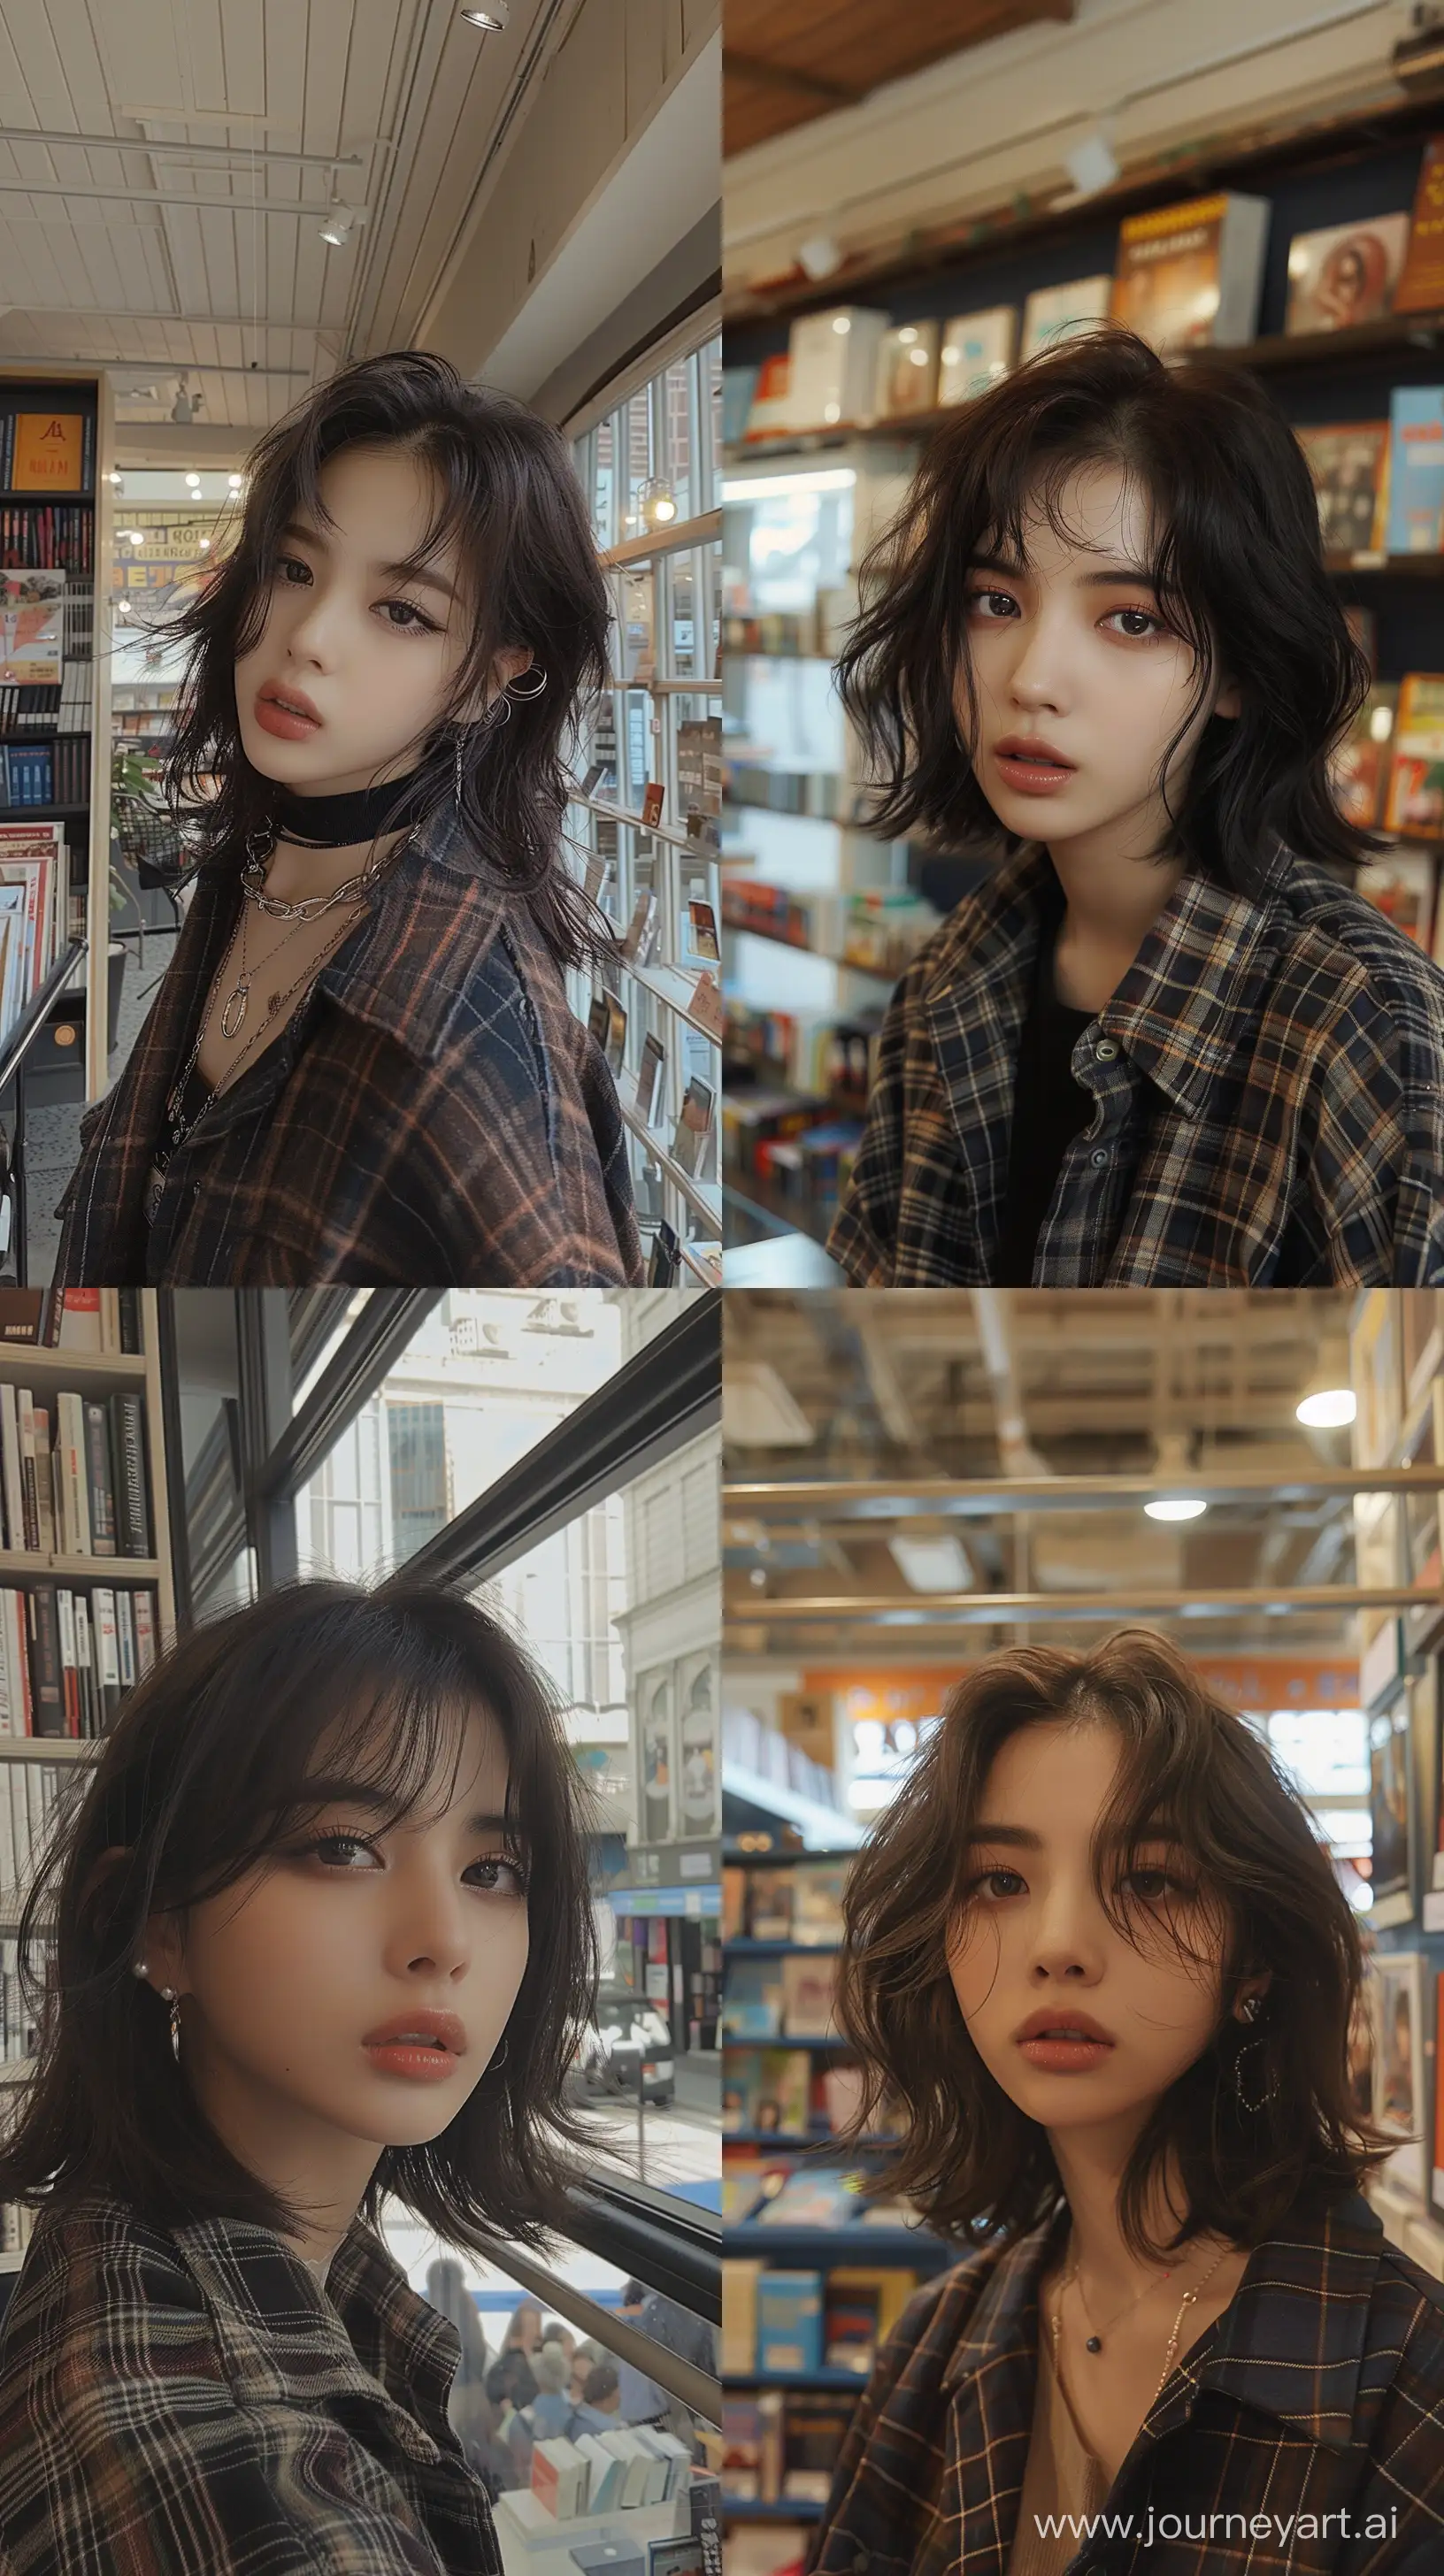 Jennie-from-BLACKPINK-with-Grunge-Makeup-in-a-Cozy-Bookstore-Setting